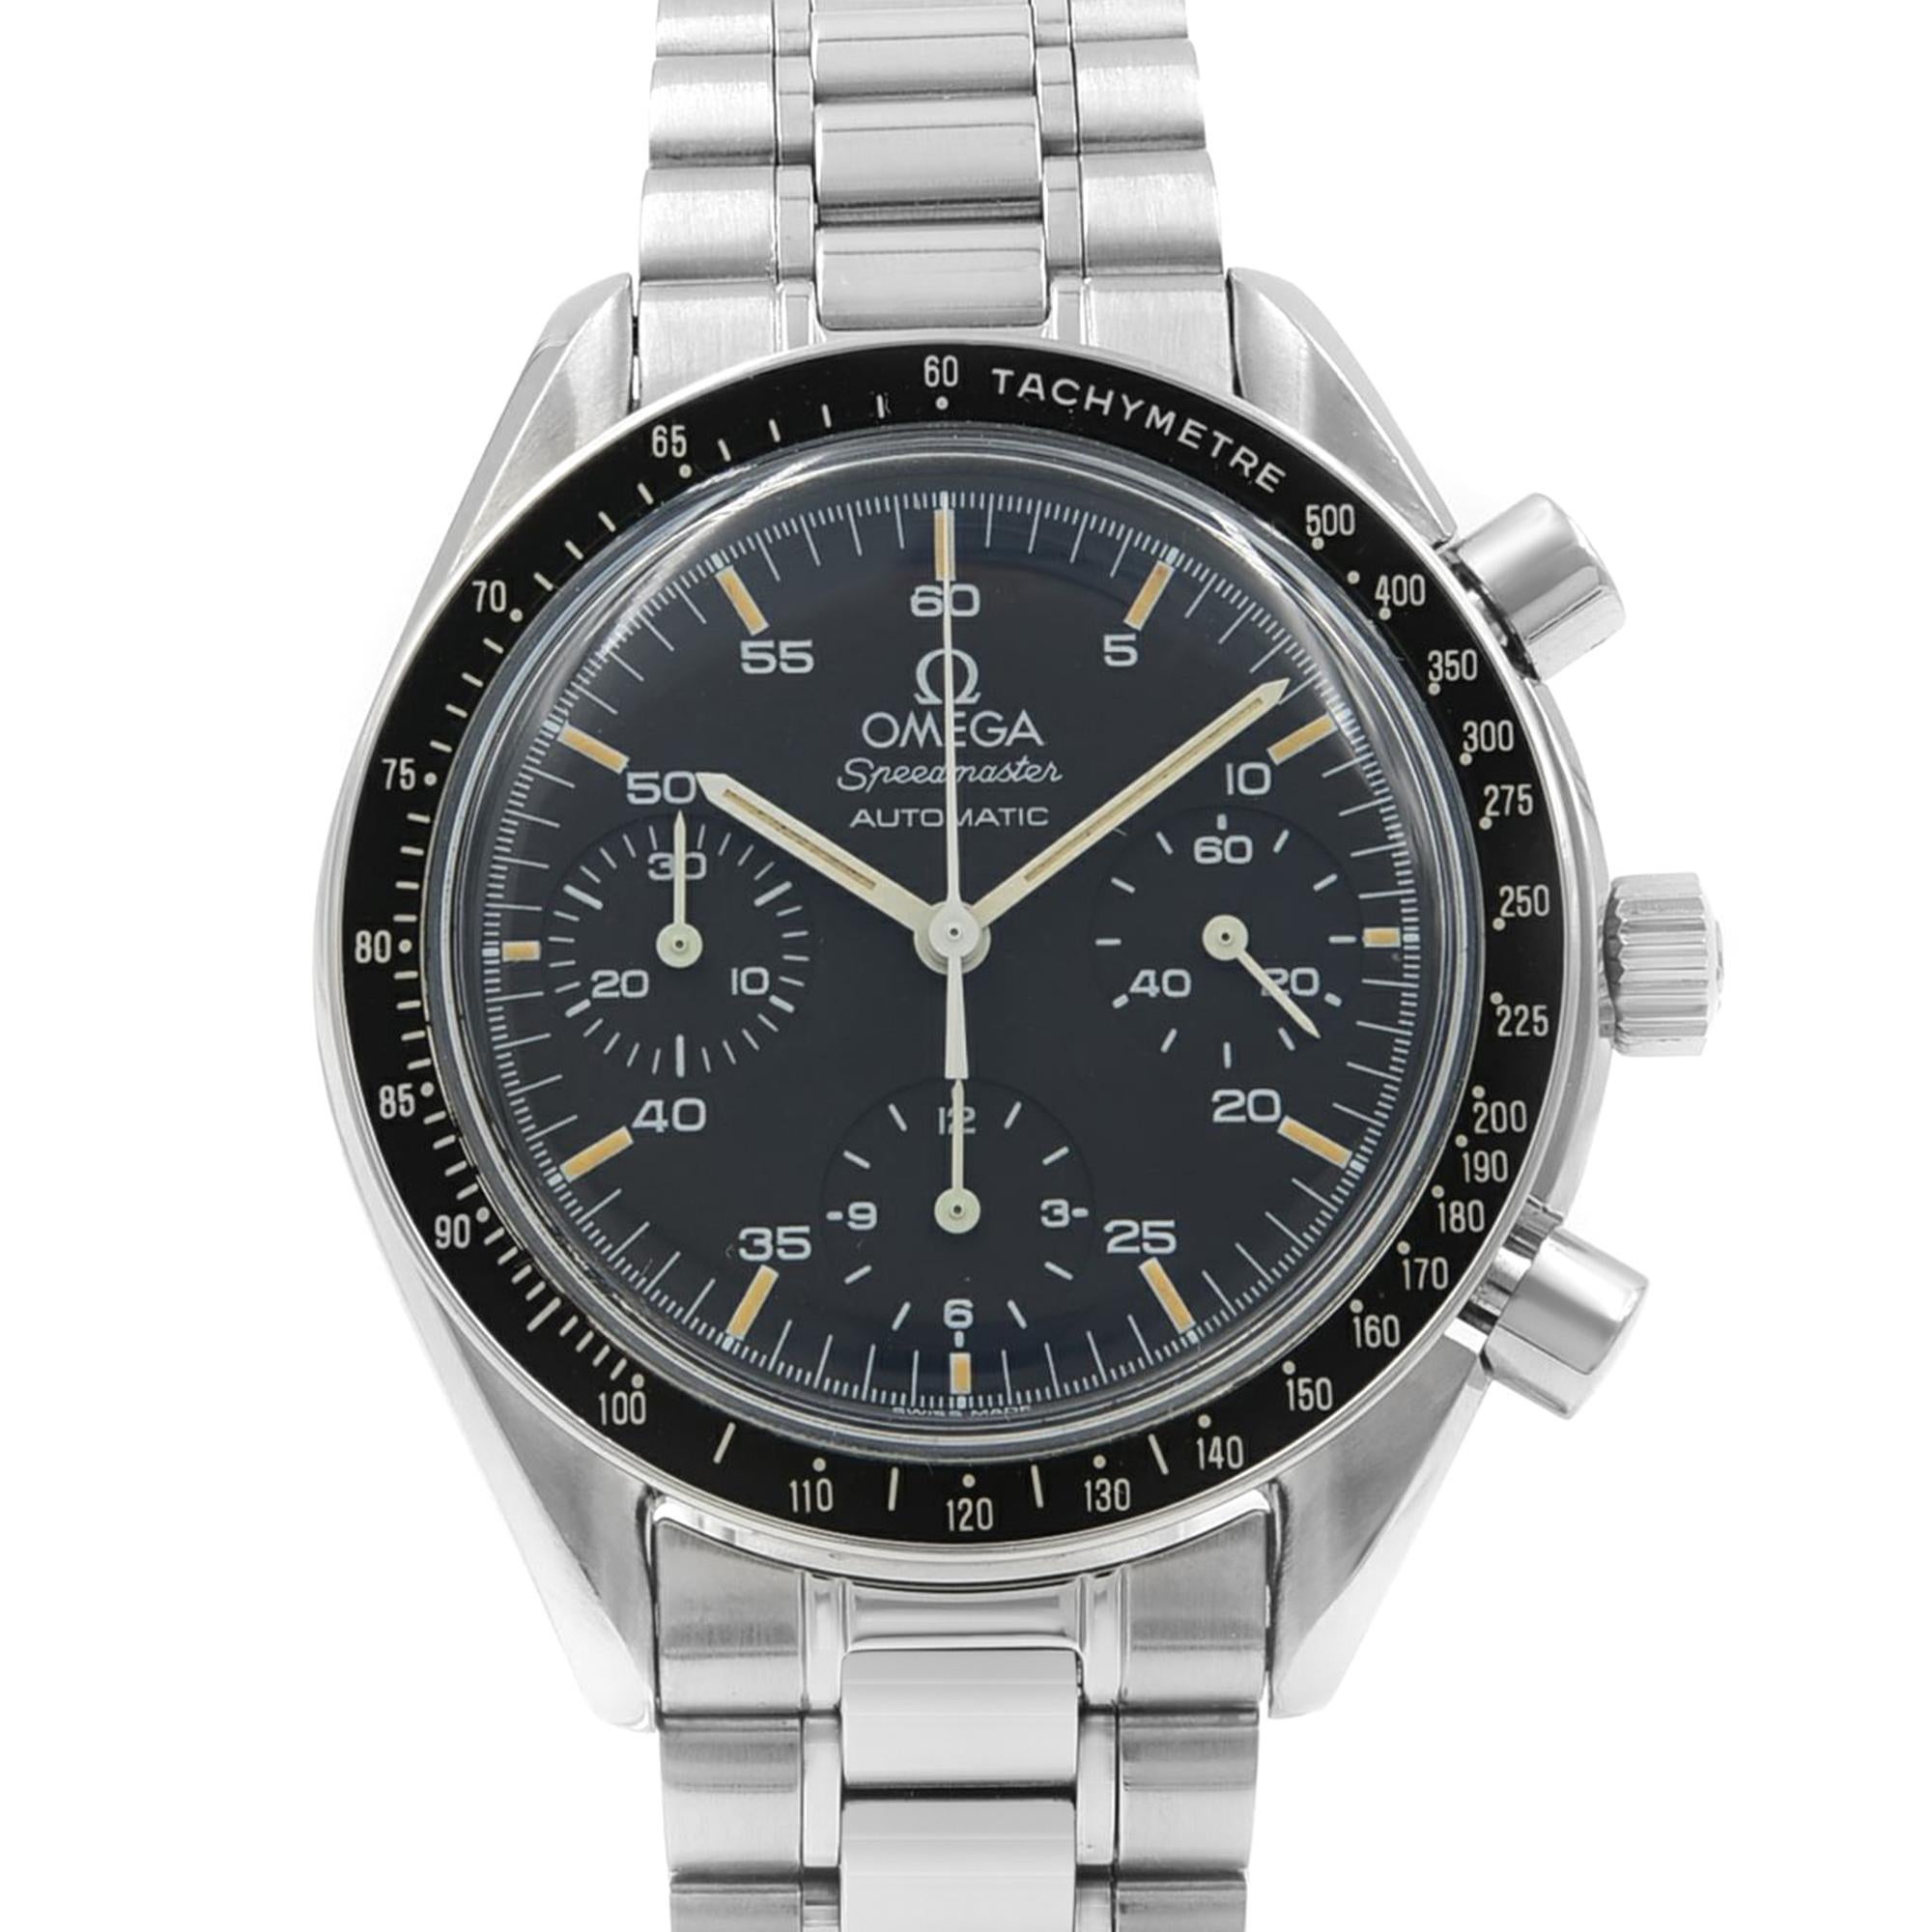 This pre-owned Omega Speedmaster  3510.50.00 is a beautiful Unisex timepiece that is powered by a mechanical (automatic) movement which is cased in a stainless steel case. It has a round shape face, chronograph, chronograph hand, small seconds